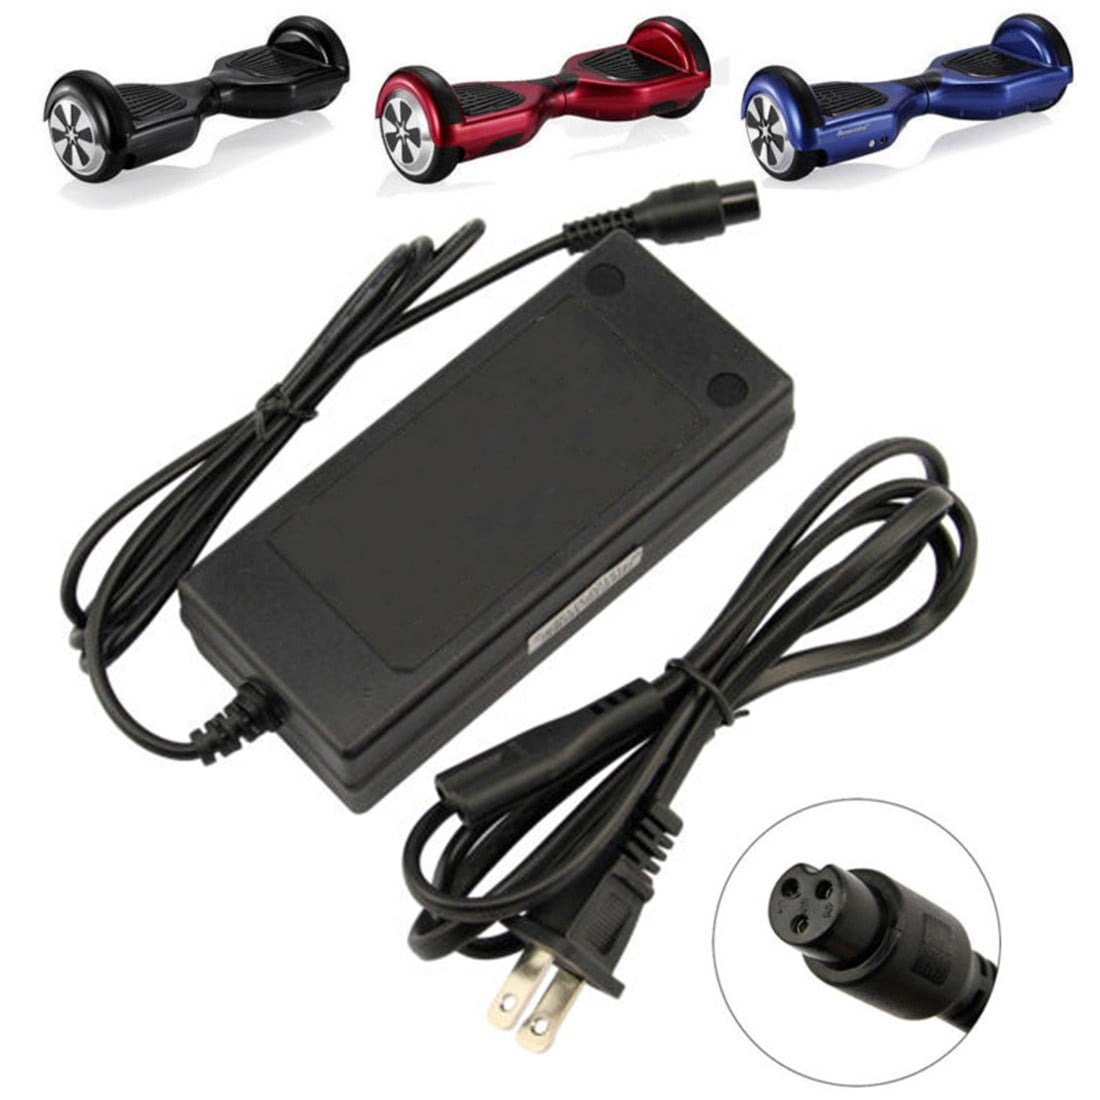 Plug FAST Charger Power Adapter For Segway/Swegway/Hoverboard Balance Board. 